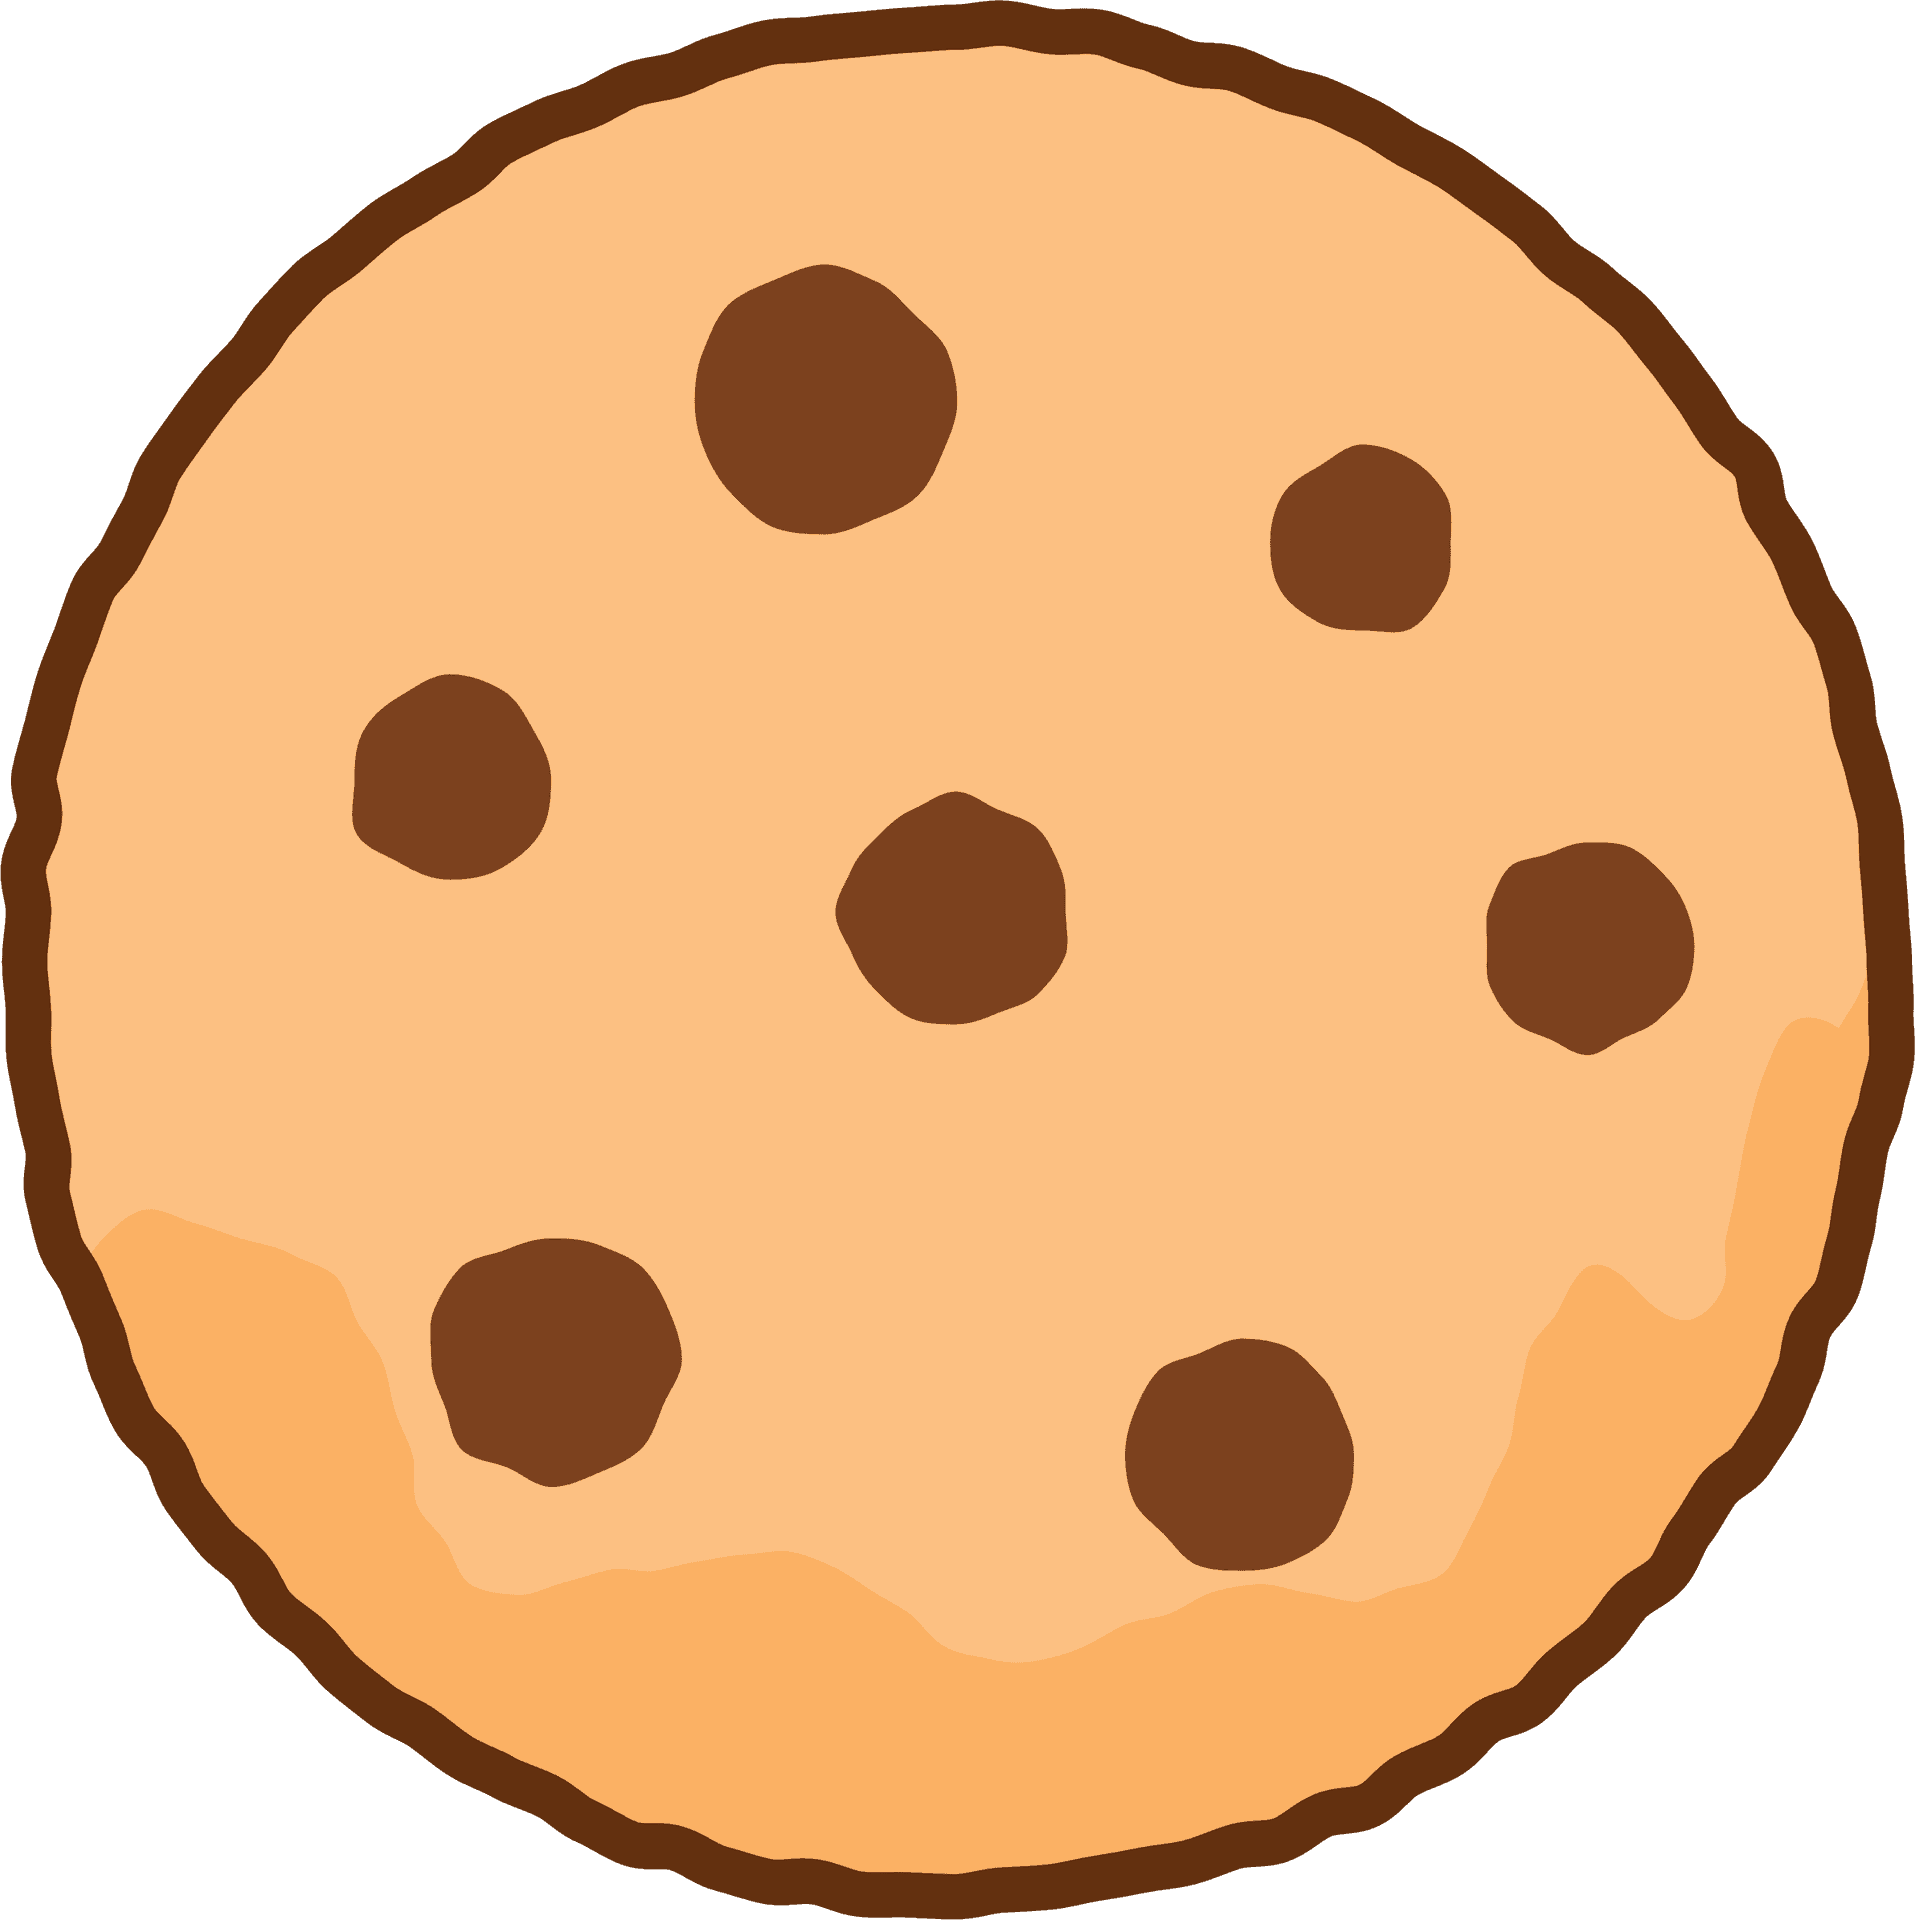 Chocolate Chip Cookie Illustration PNG